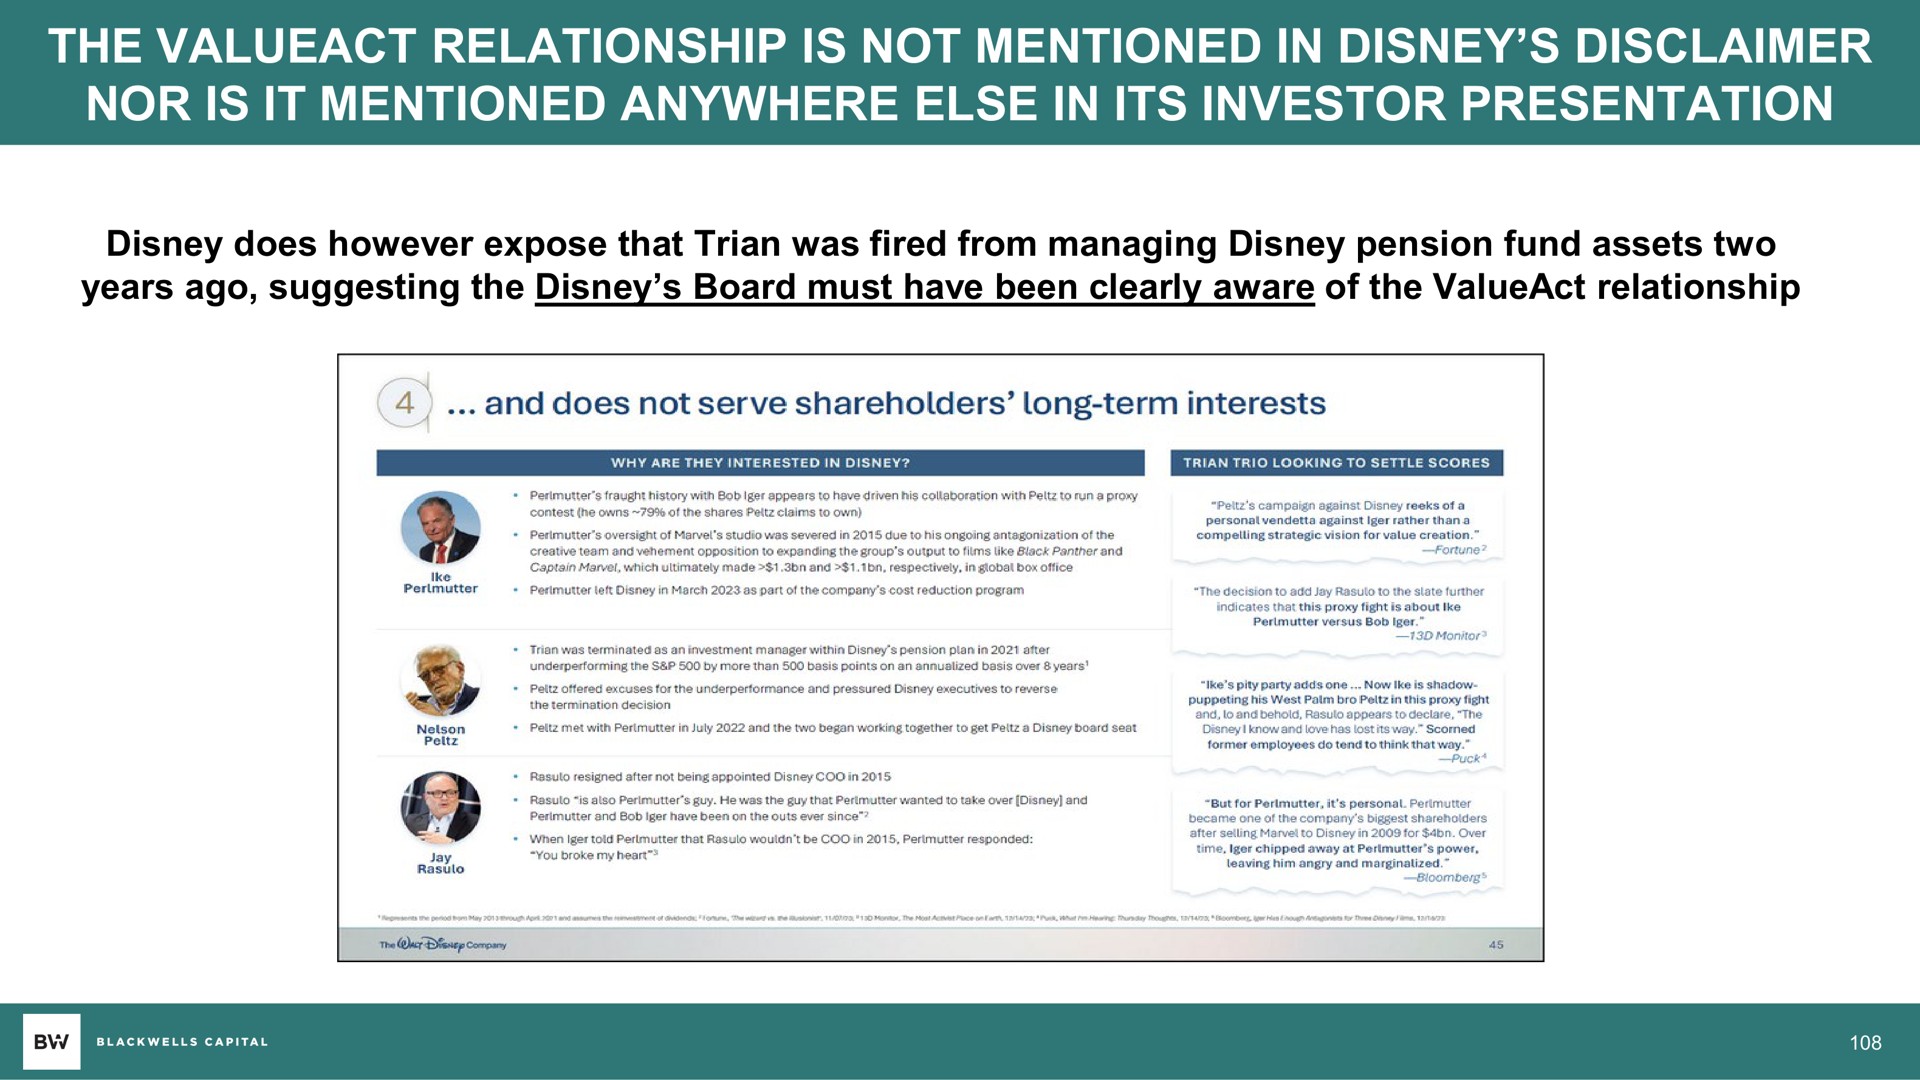 the relationship is not mentioned in disclaimer nor is it mentioned anywhere else in its investor presentation | Blackwells Capital